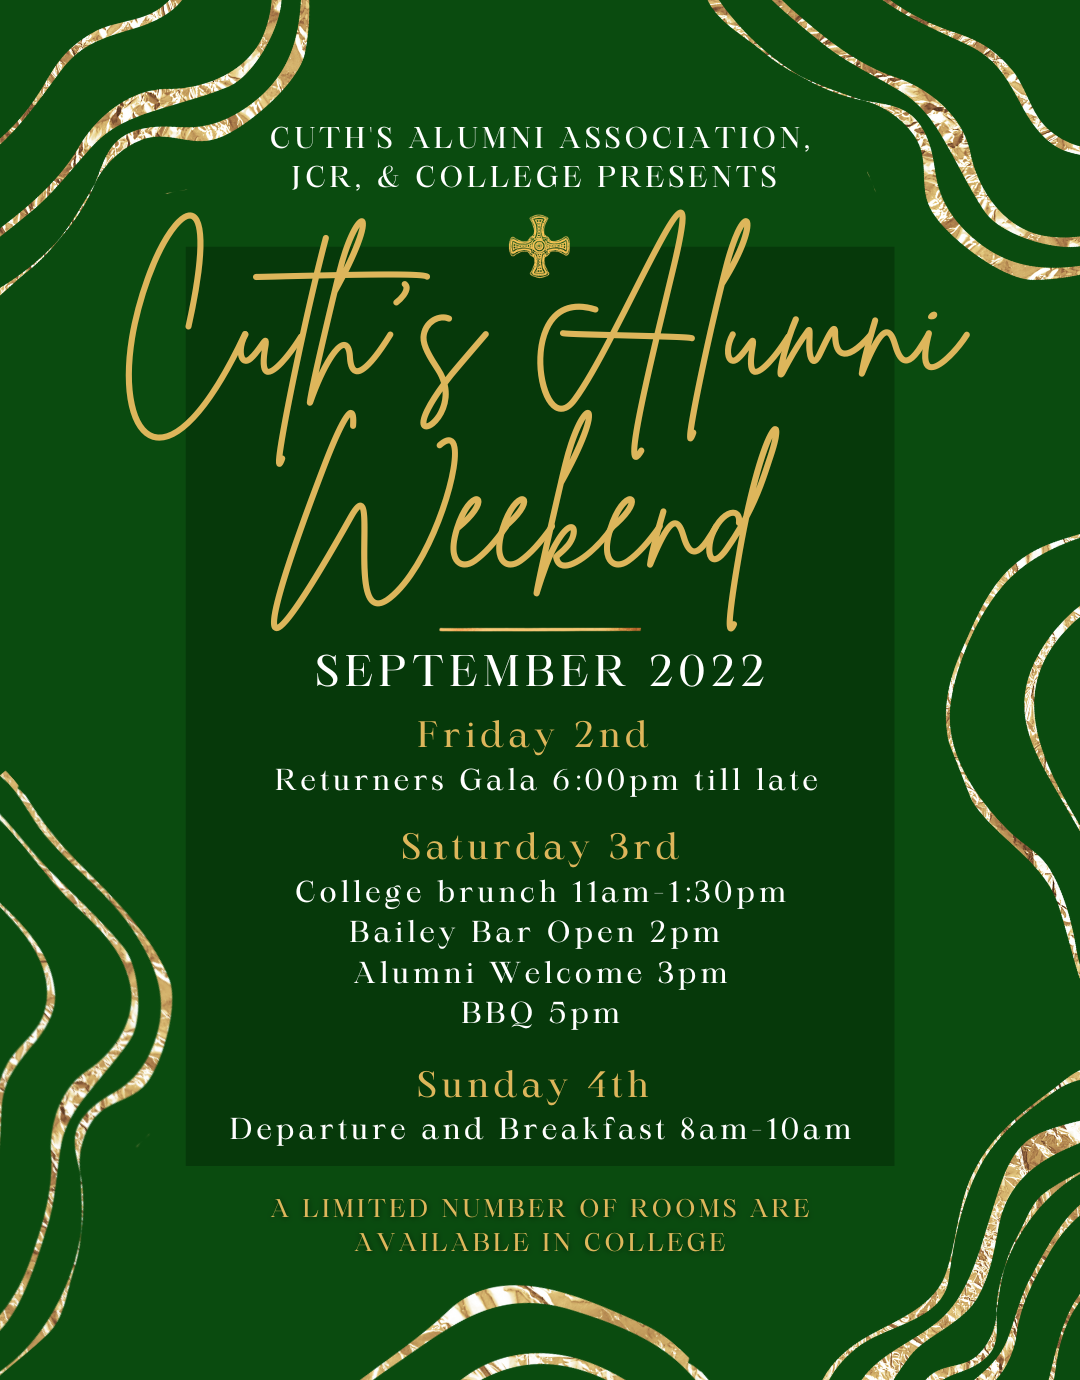 Invitation to Cuth's Alumni Weekend 2nd to 4th Sept 2022